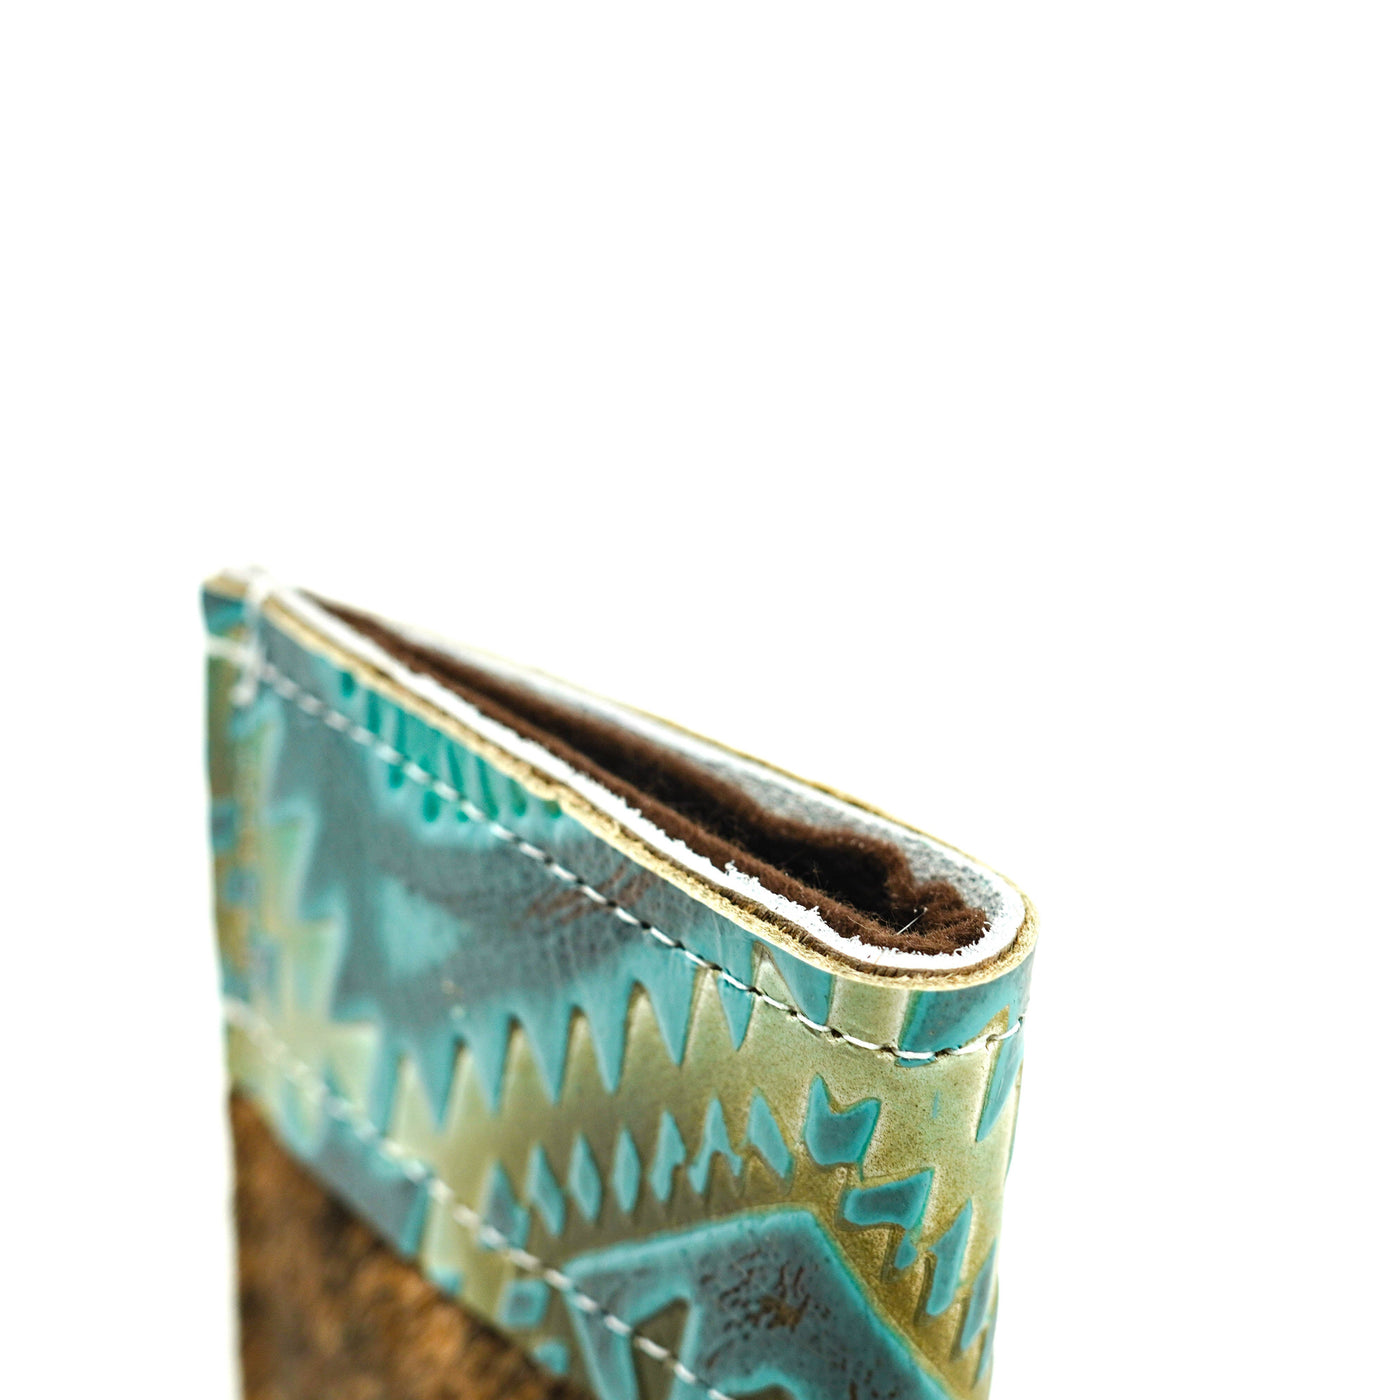 Sunglass Case - Light Brindle w/ Canyon Aztec-Sunglass Case-Western-Cowhide-Bags-Handmade-Products-Gifts-Dancing Cactus Designs